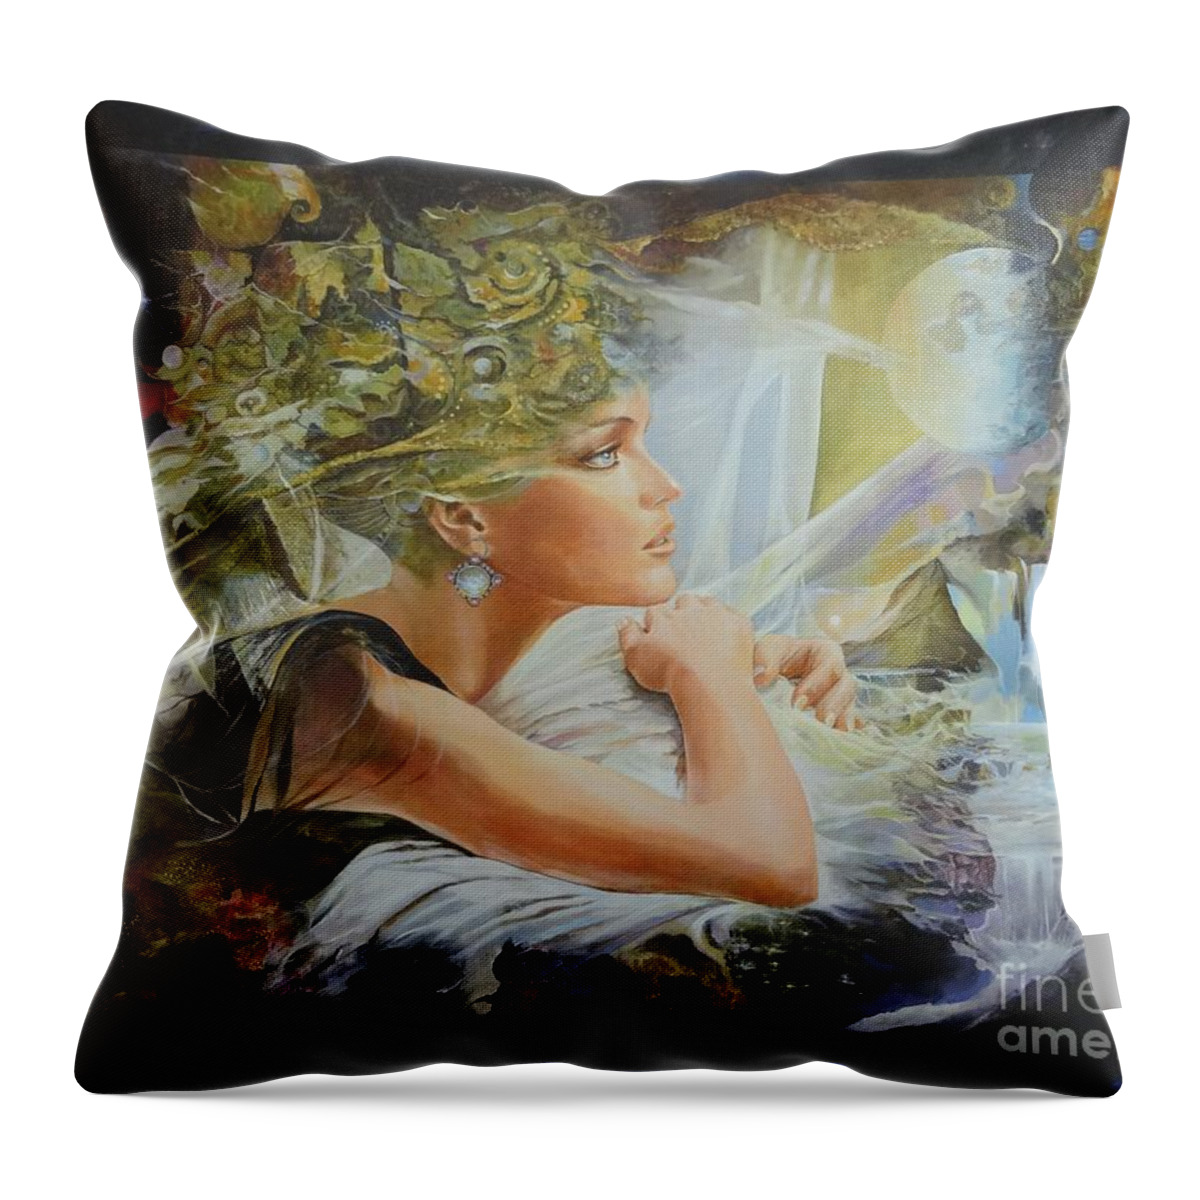 Figures Throw Pillow featuring the painting Destiny by Sinisa Saratlic